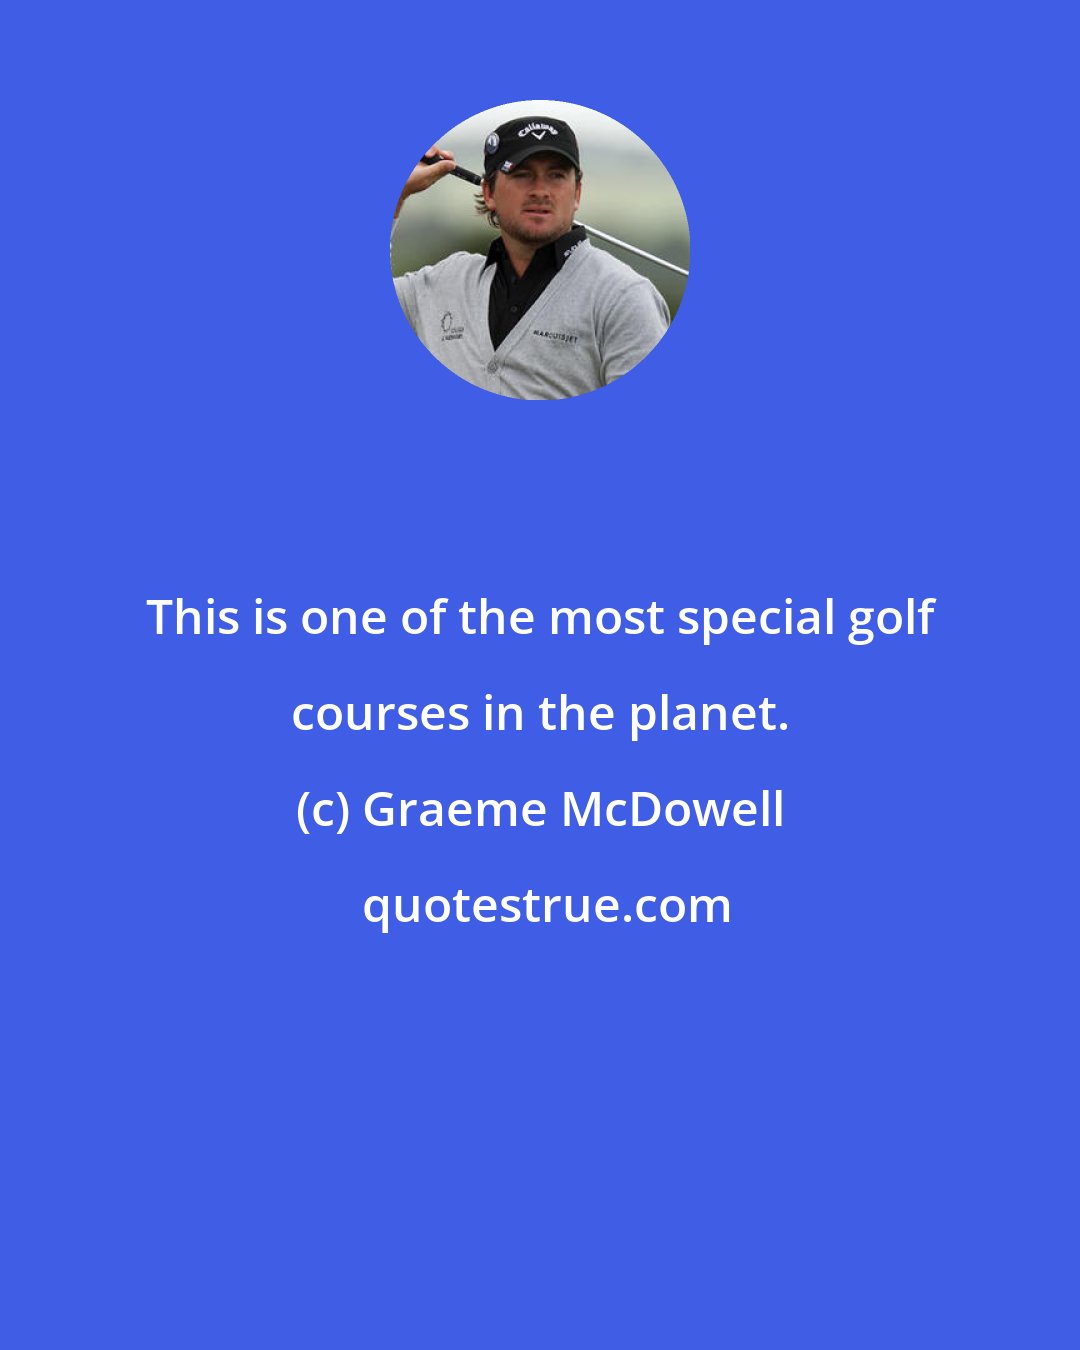 Graeme McDowell: This is one of the most special golf courses in the planet.